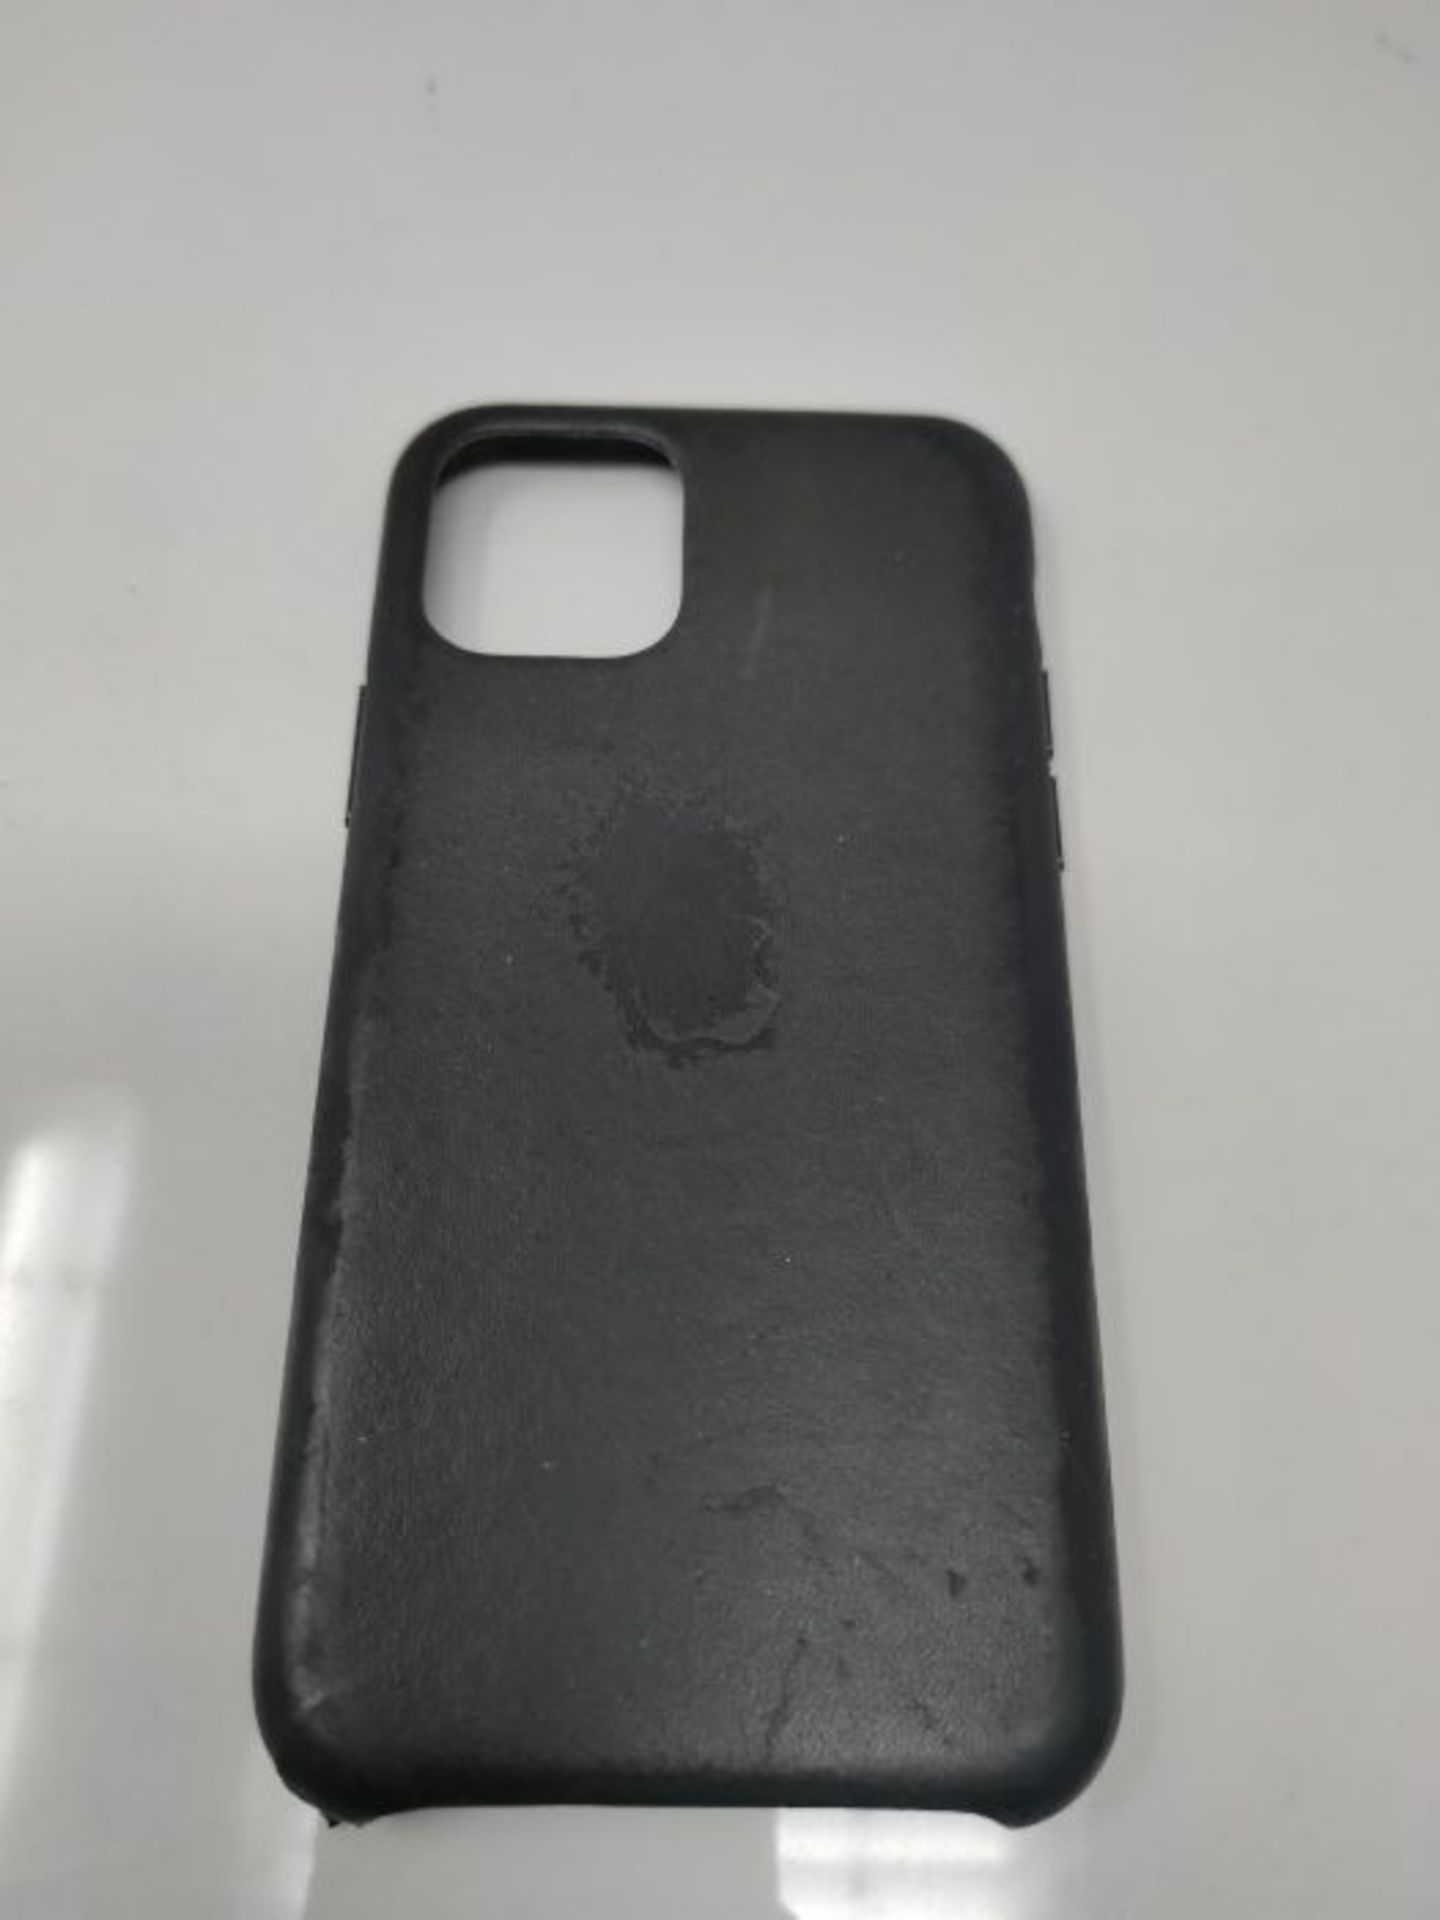 Apple Leather Case (for iPhone 11 Pro) - Black - Image 3 of 3